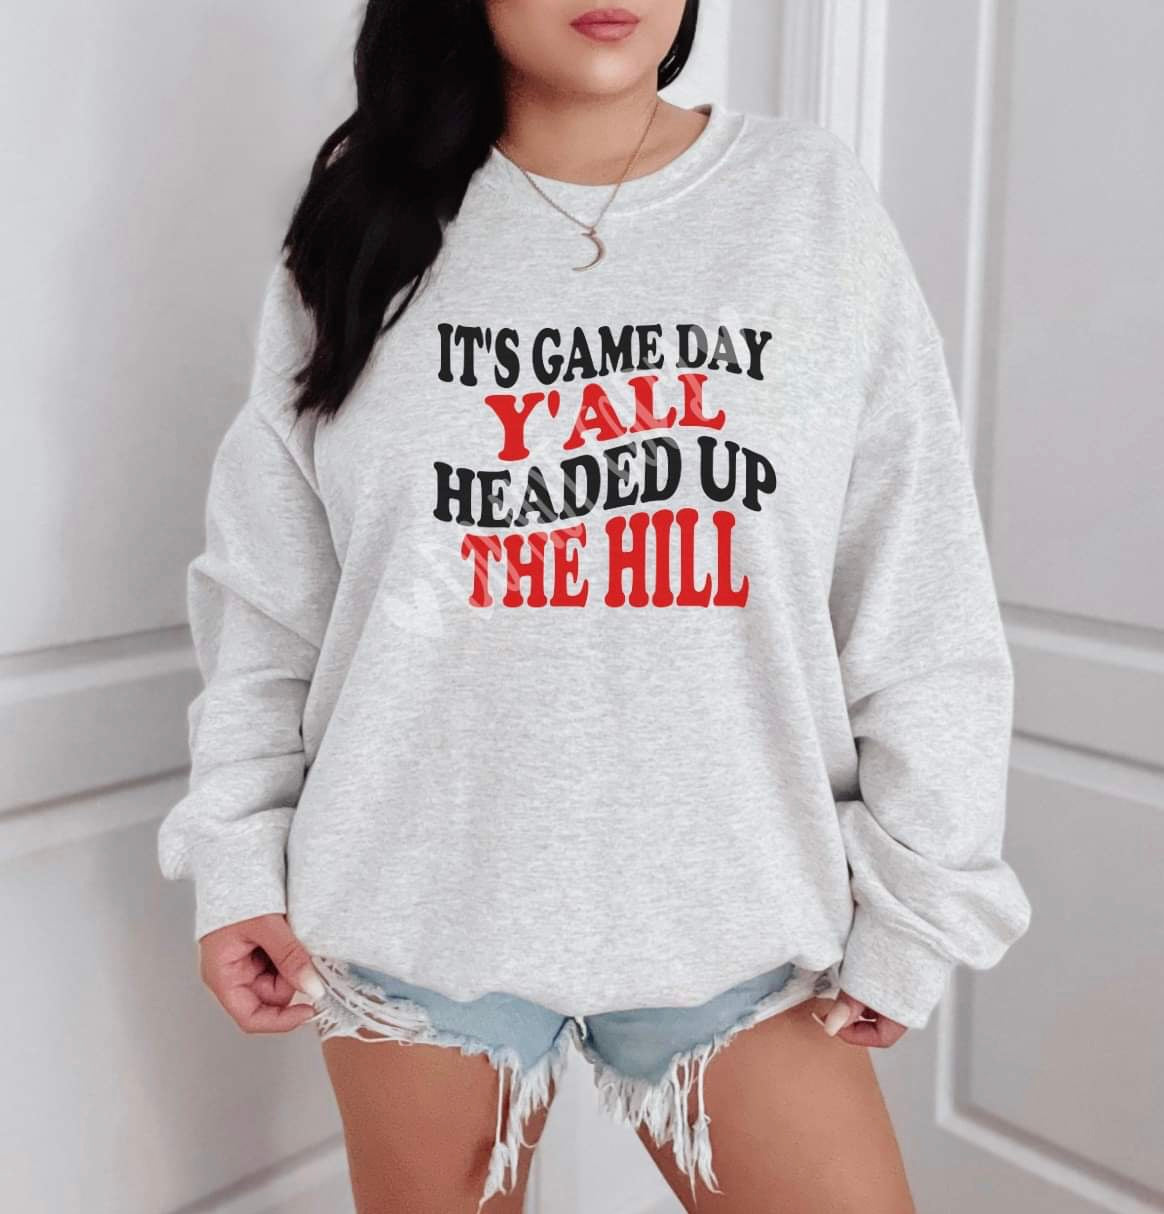 IT'S GAME DAY Y'ALL HEADED UP THE HILL CREWNECK SWEATSHIRT